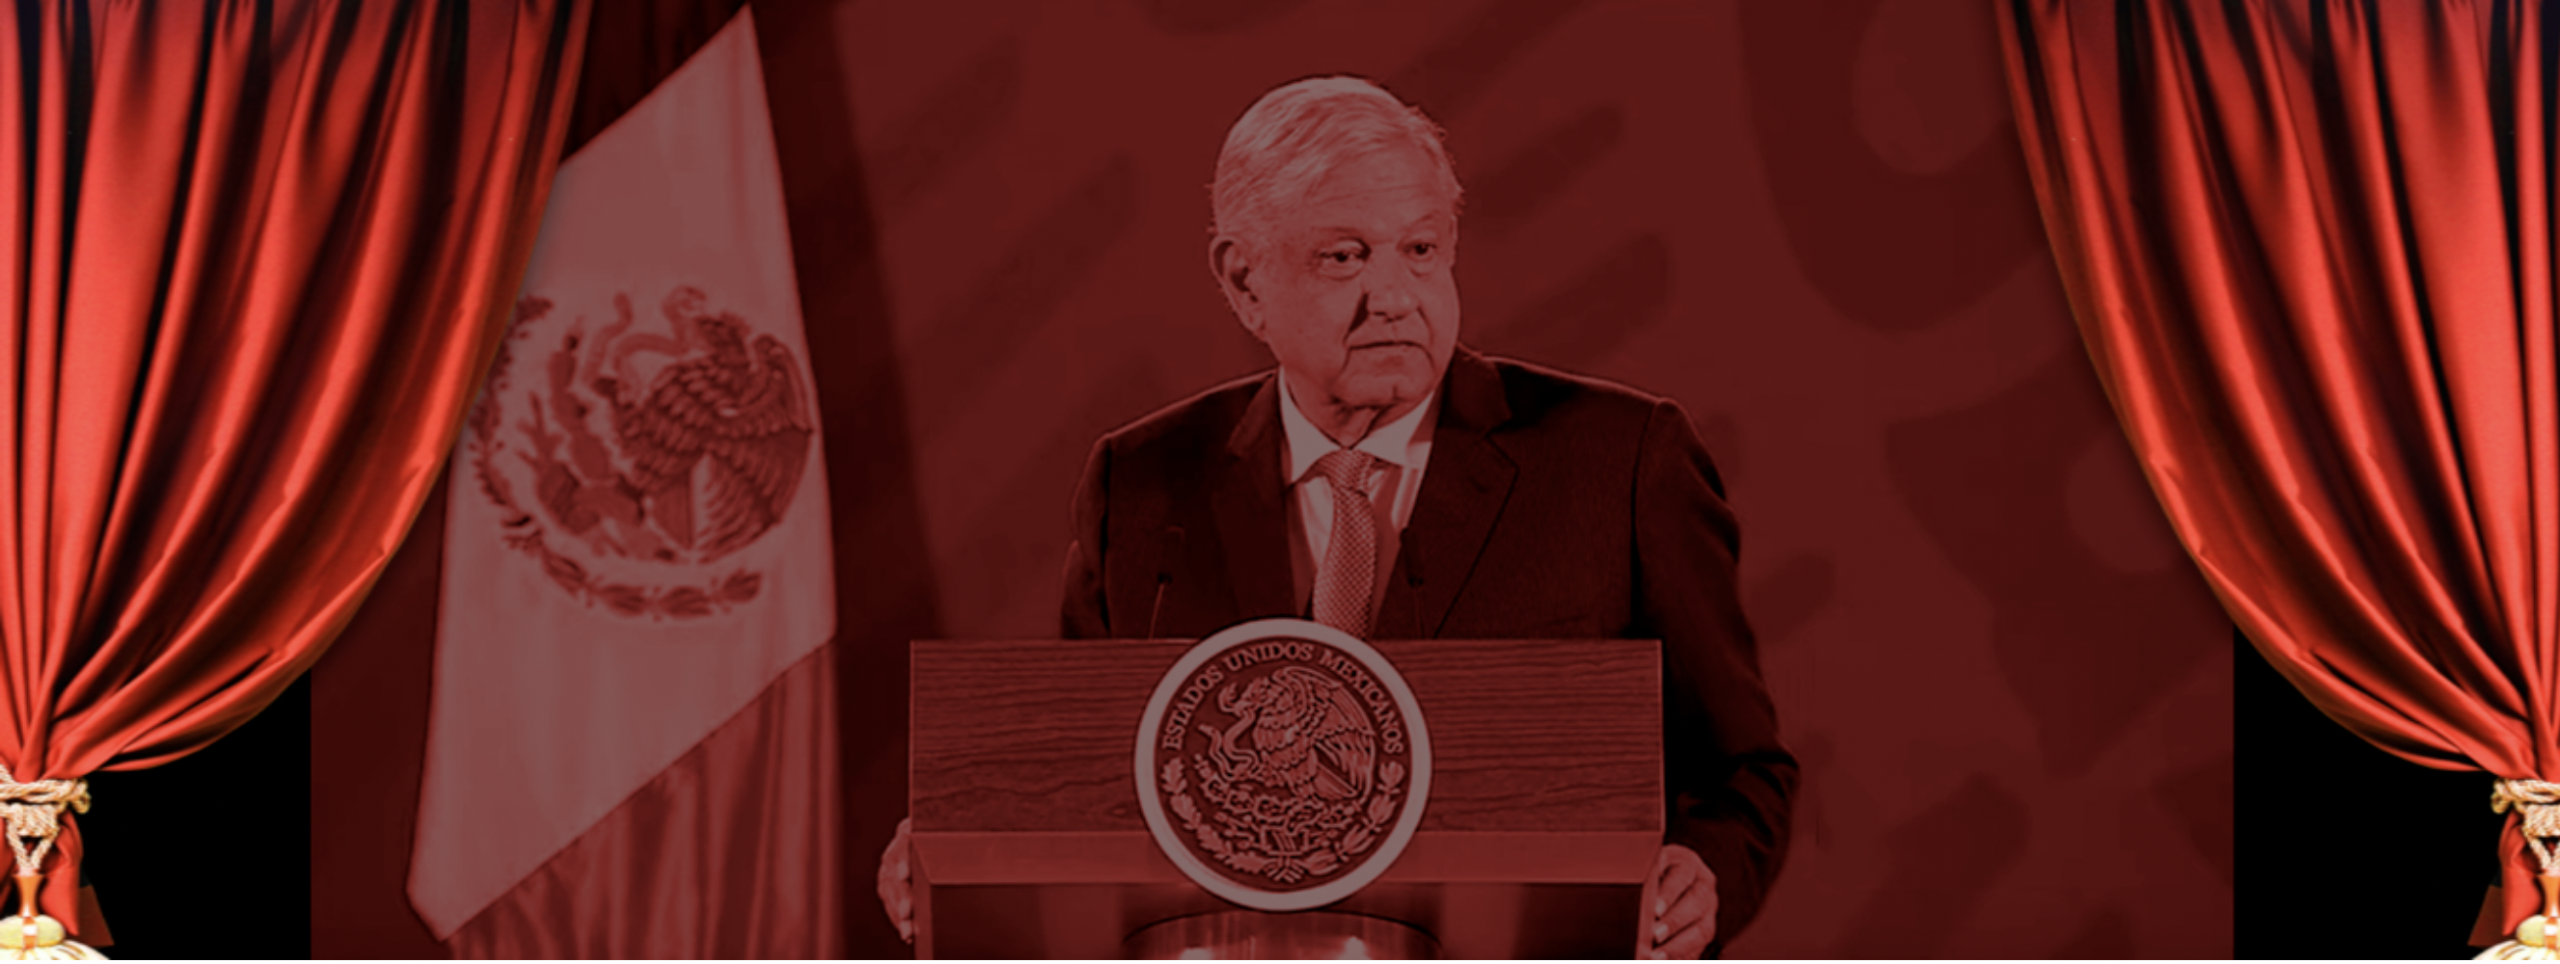 Media outlets highlight Mexican president’s inadequate COVID-19 response